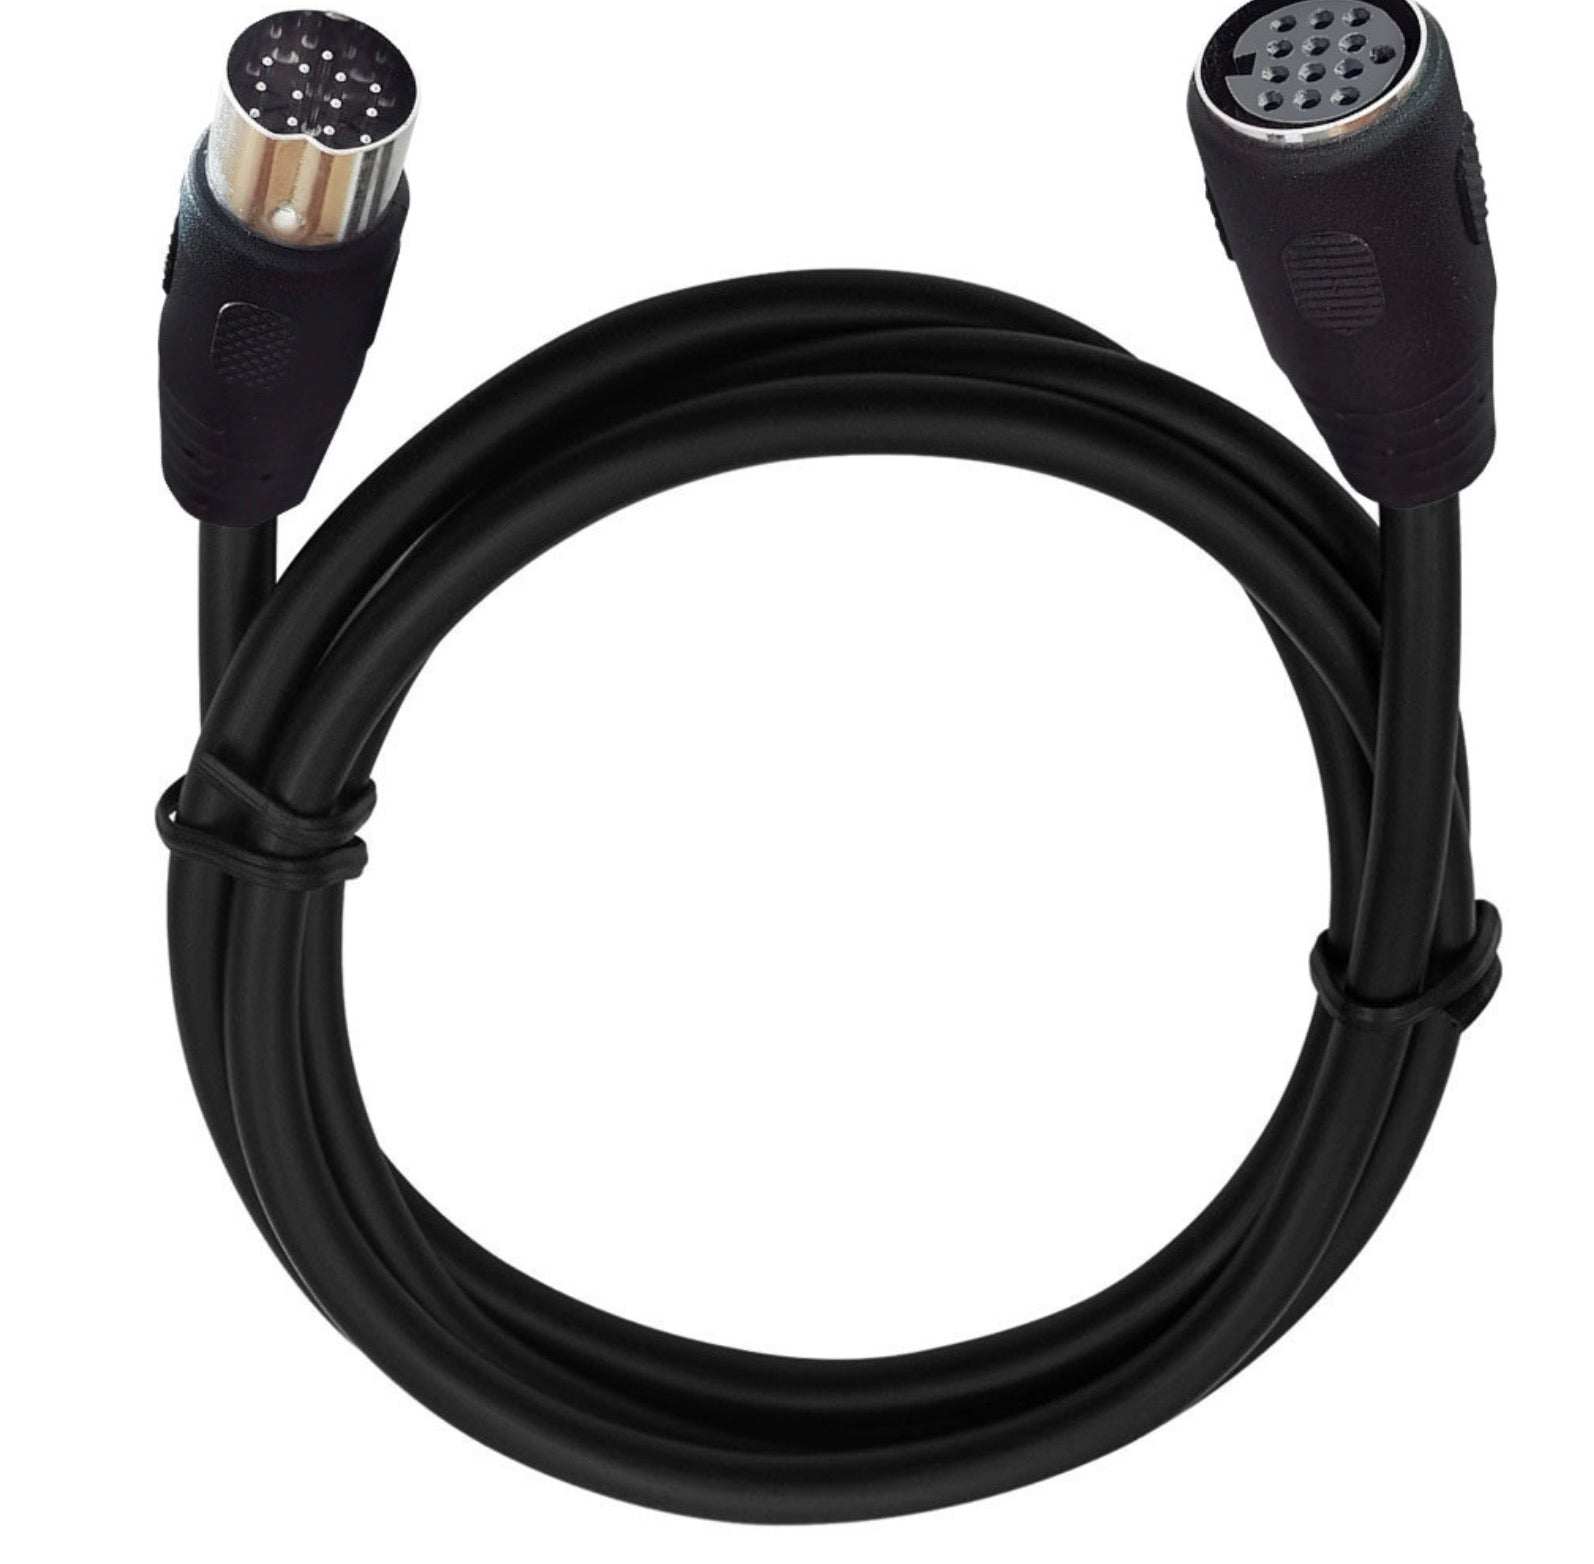 13 Pin Din Male to Female Extension Cable for Ham Radio, Icom Receivers, Kenwood